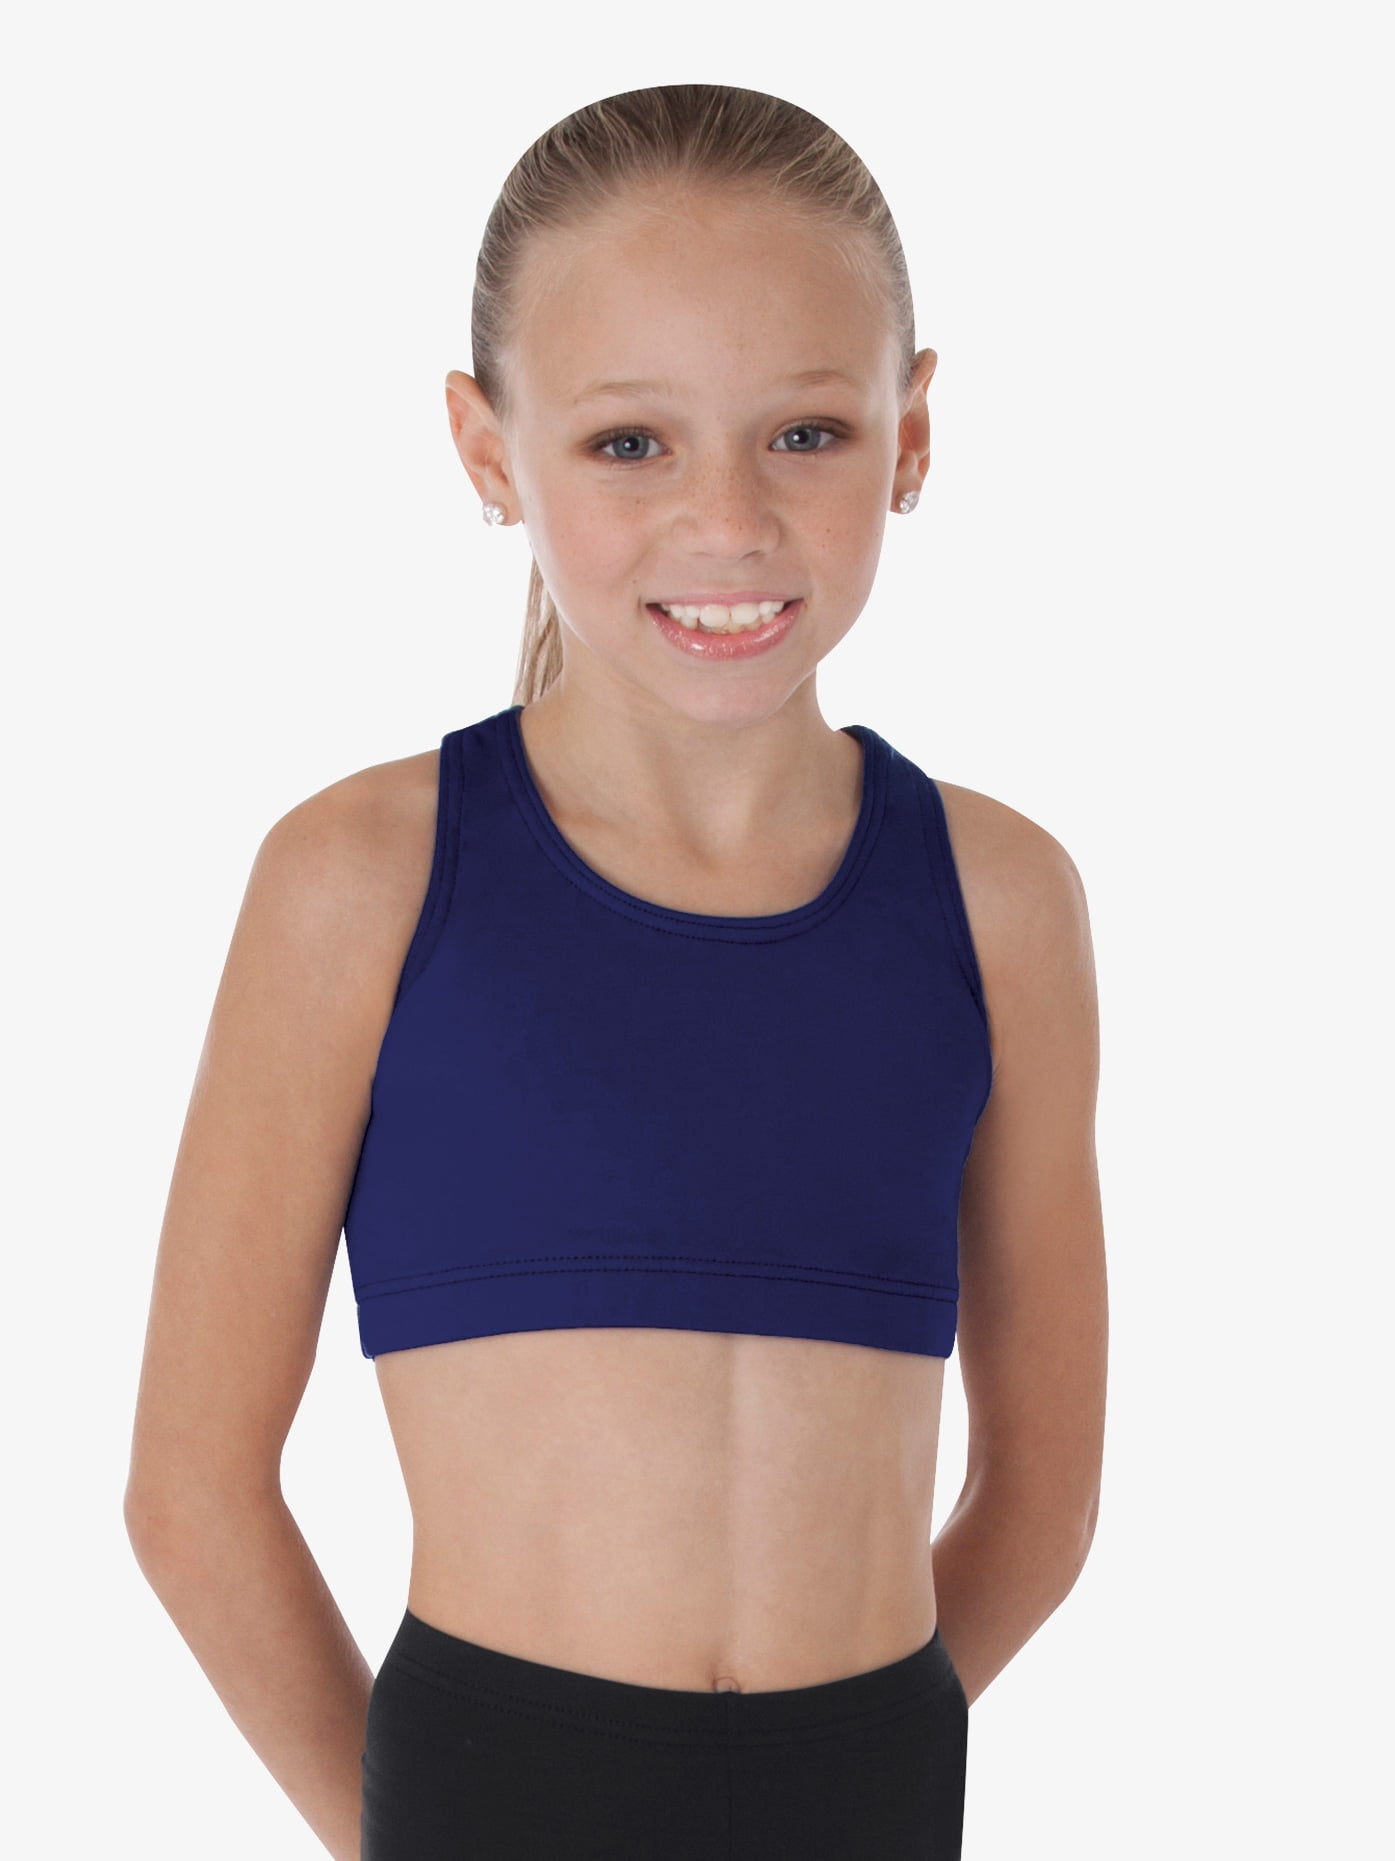  MANJIAMEI Big Girls Sports Bras Wireless Light Padded A Cup  Solid Pack of 4, 32: Clothing, Shoes & Jewelry